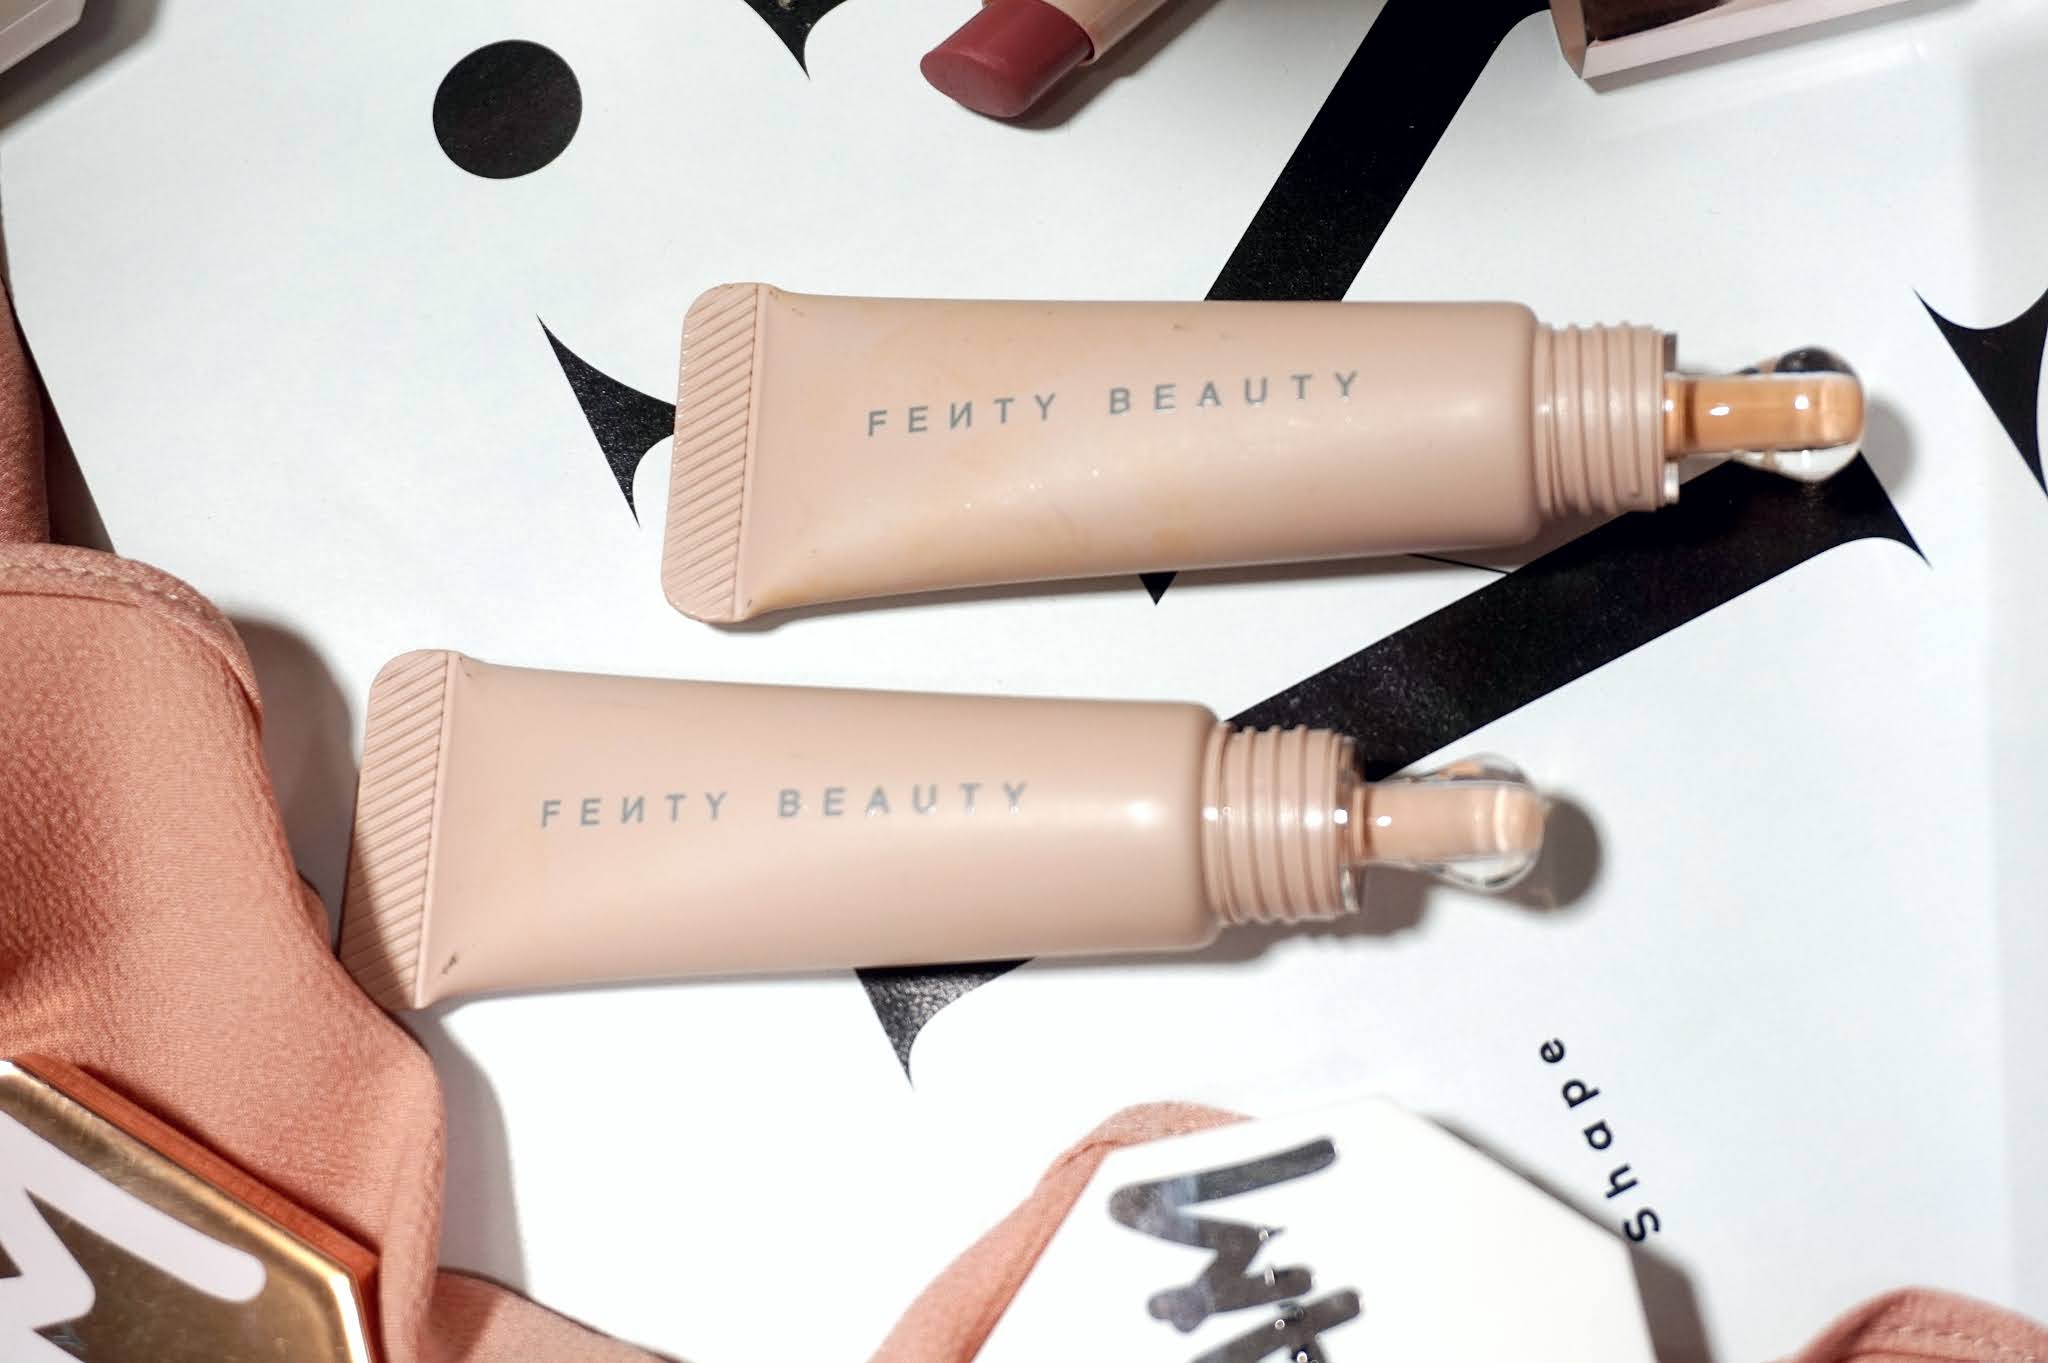 Fenty Beauty Bright Fix Eye Brightener Concealer Review and Swatches